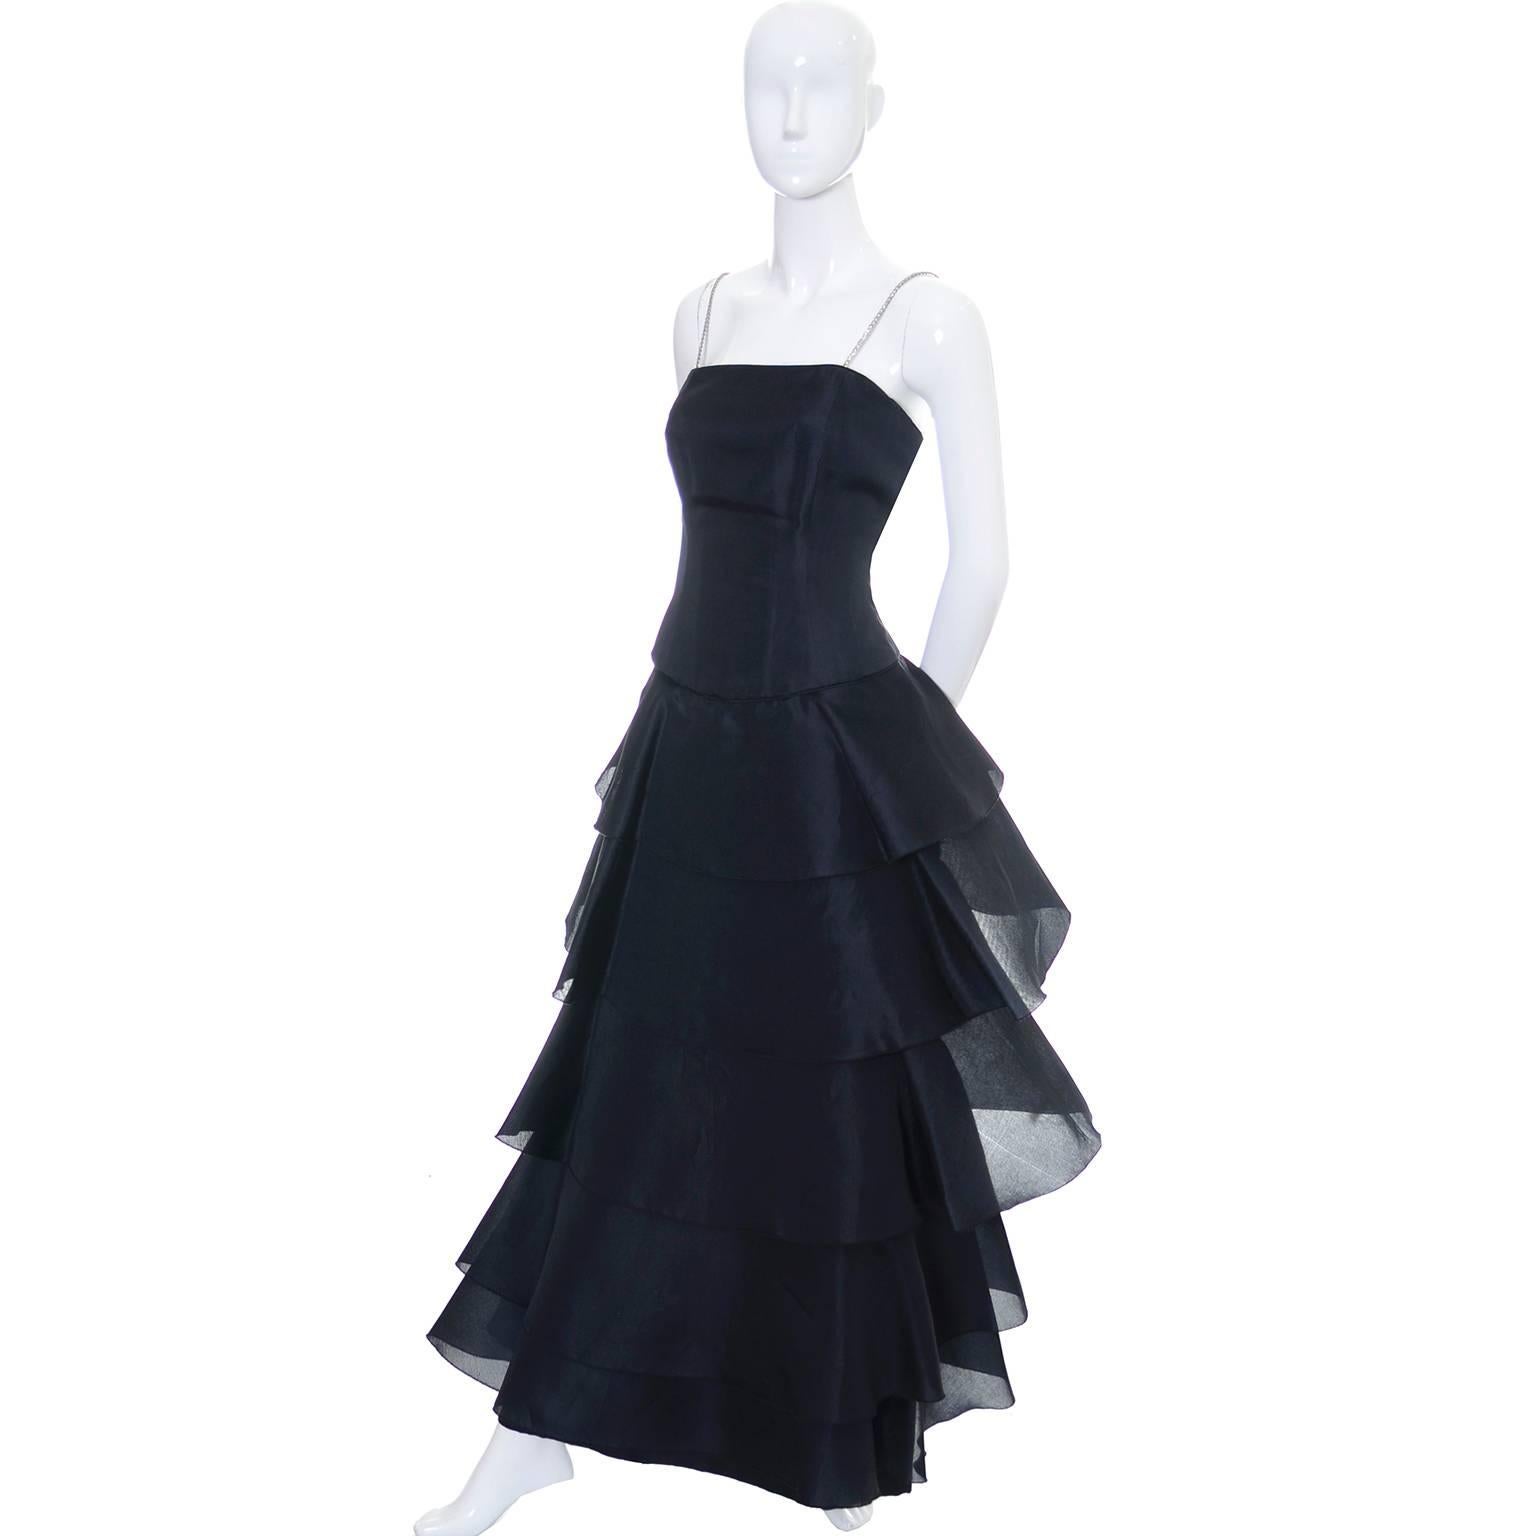 This dramatic black, full length 100% silk statement dress was designed by Akira Isogawa, one of Australia’s most important designers. Isogawa was born in Kyoto Japan and moved to Australia in 1986 to study fashion design at the Sydney Institute of